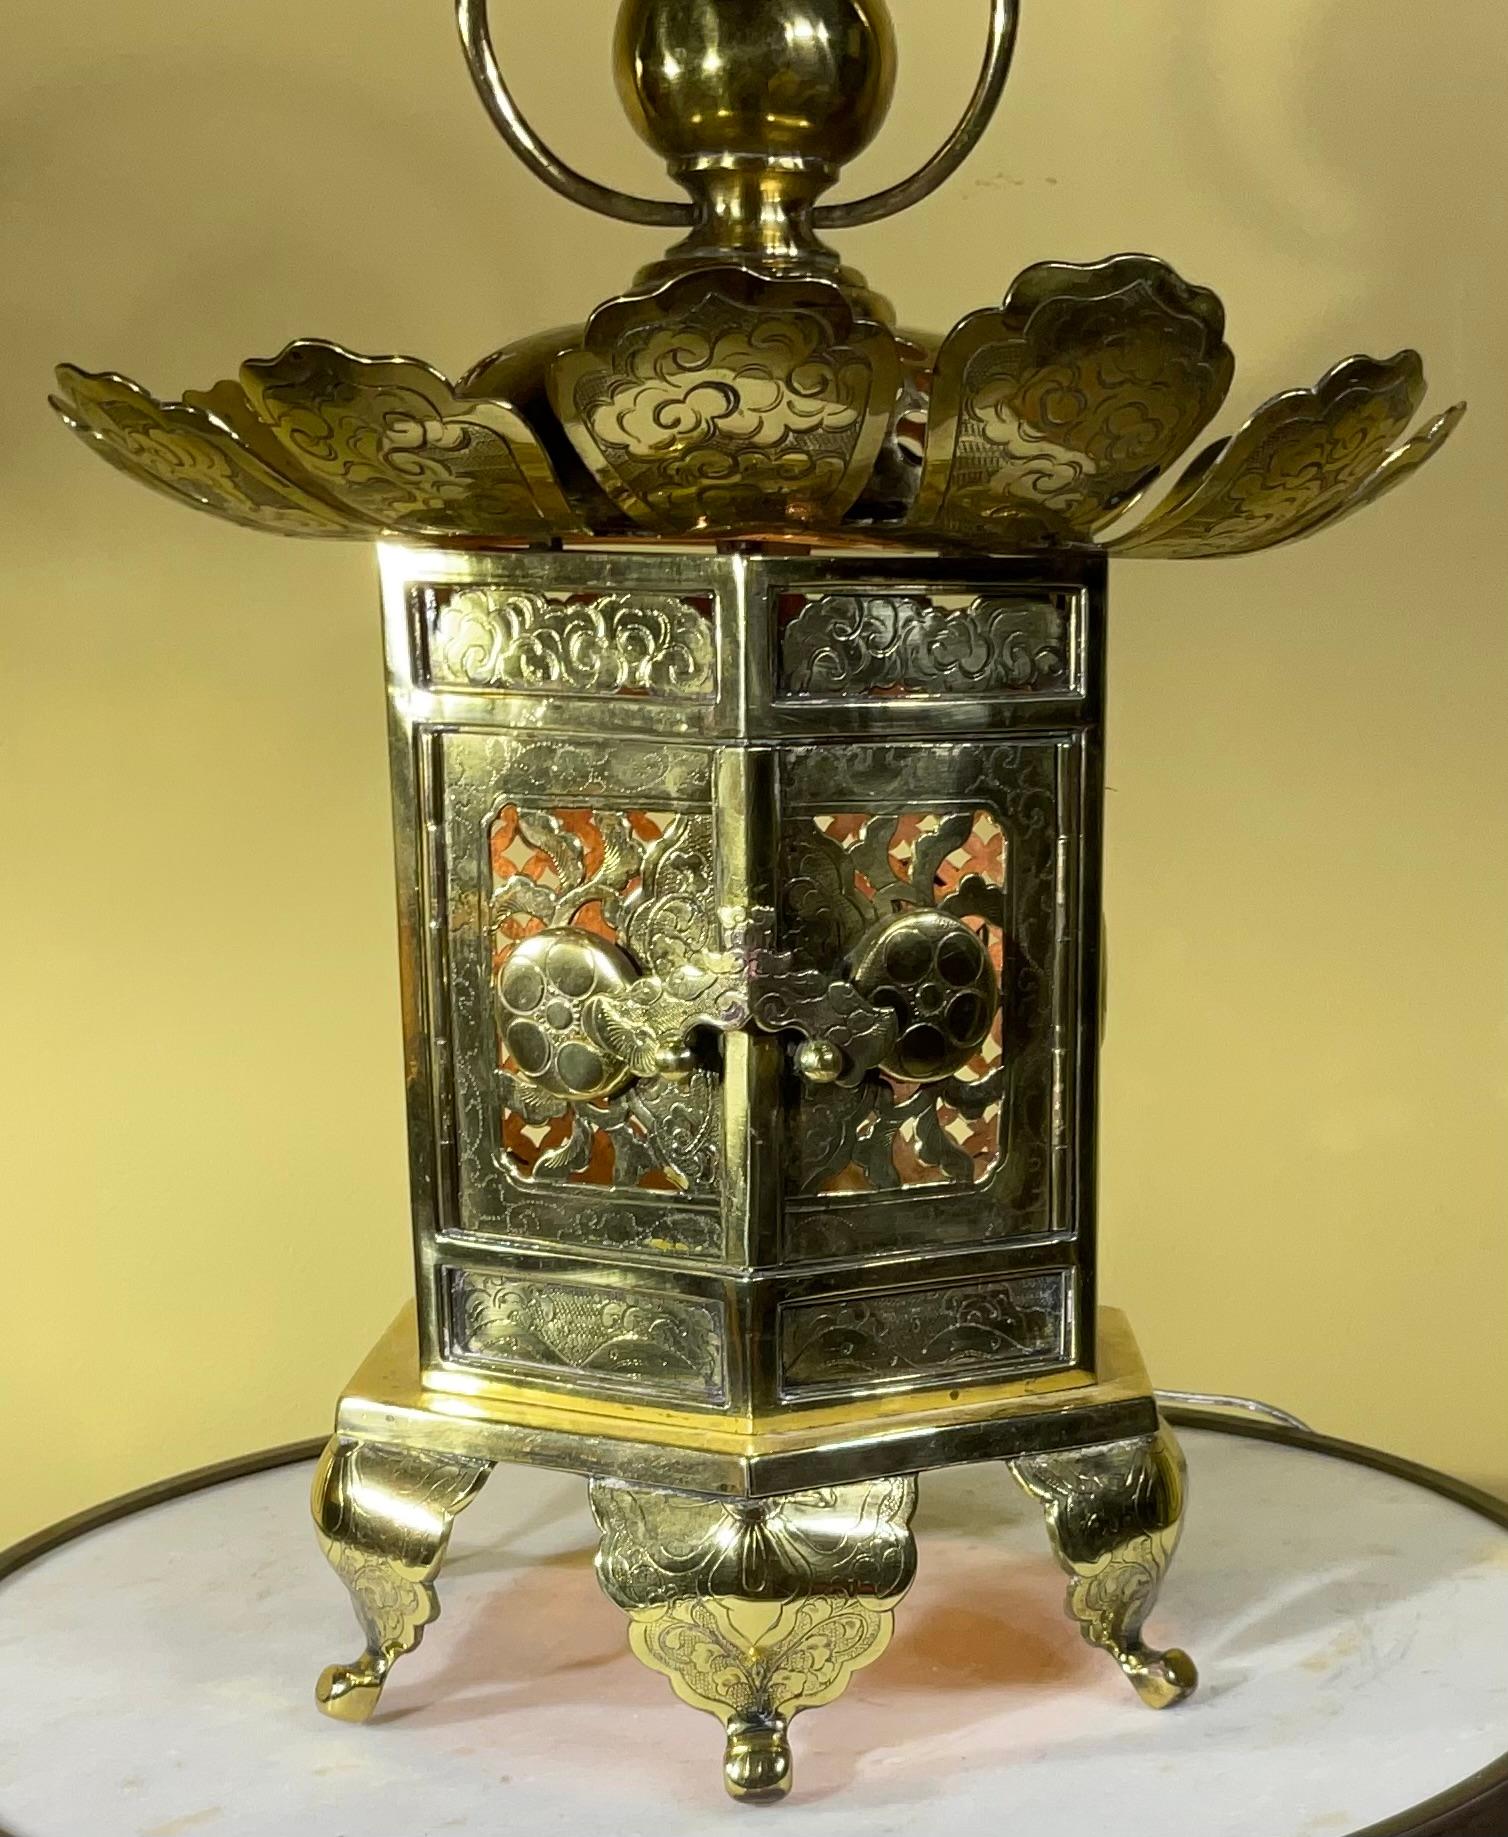 Hand-Crafted Vintage Japanese  Buddhist Alter Brass Lantern / Table Lamp / Center Piece  For Sale